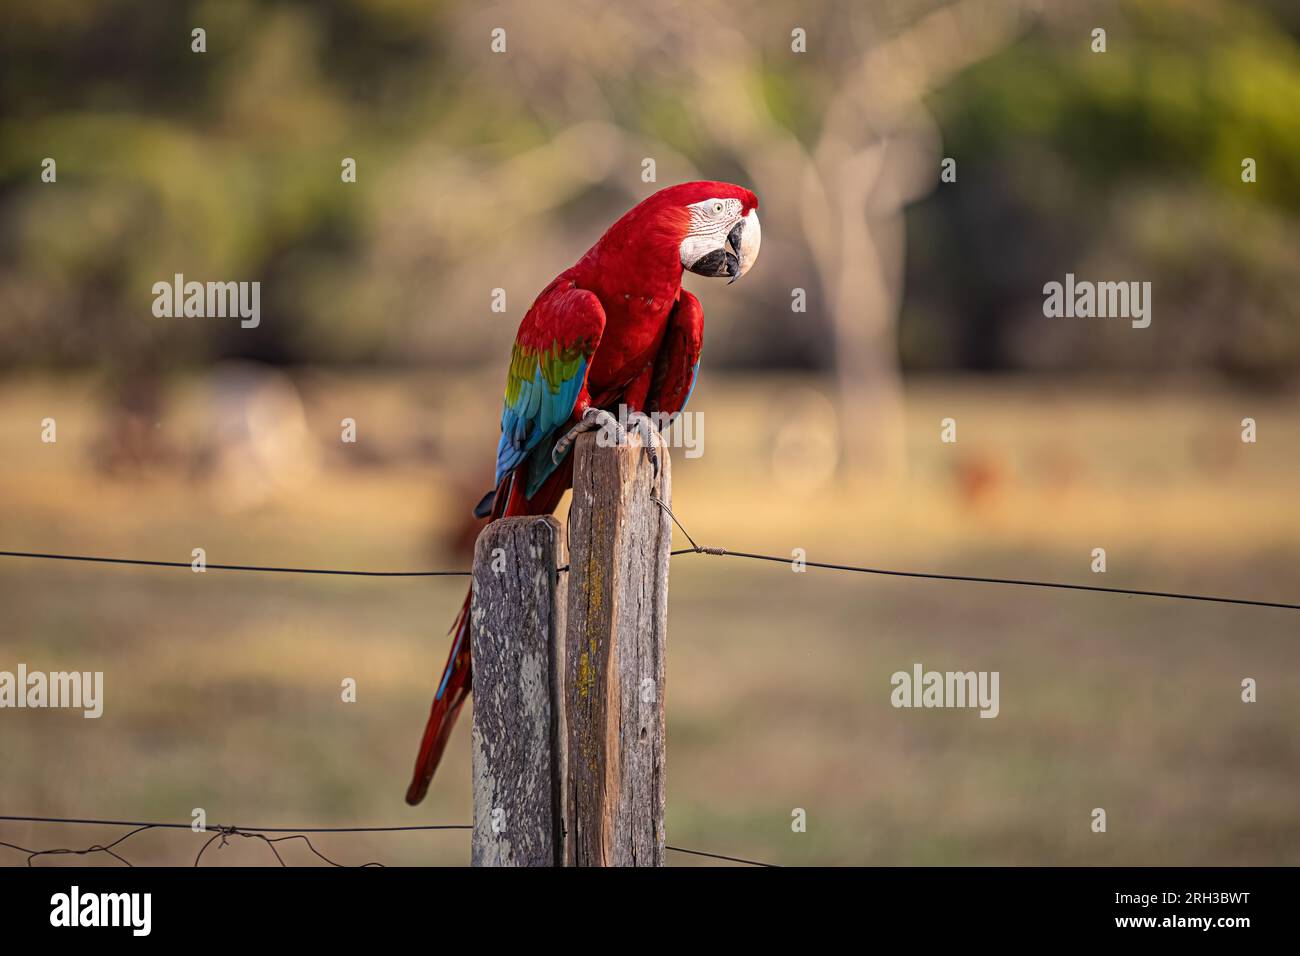 Adult Red and green Macaw of the species Ara chloropterus Stock Photo